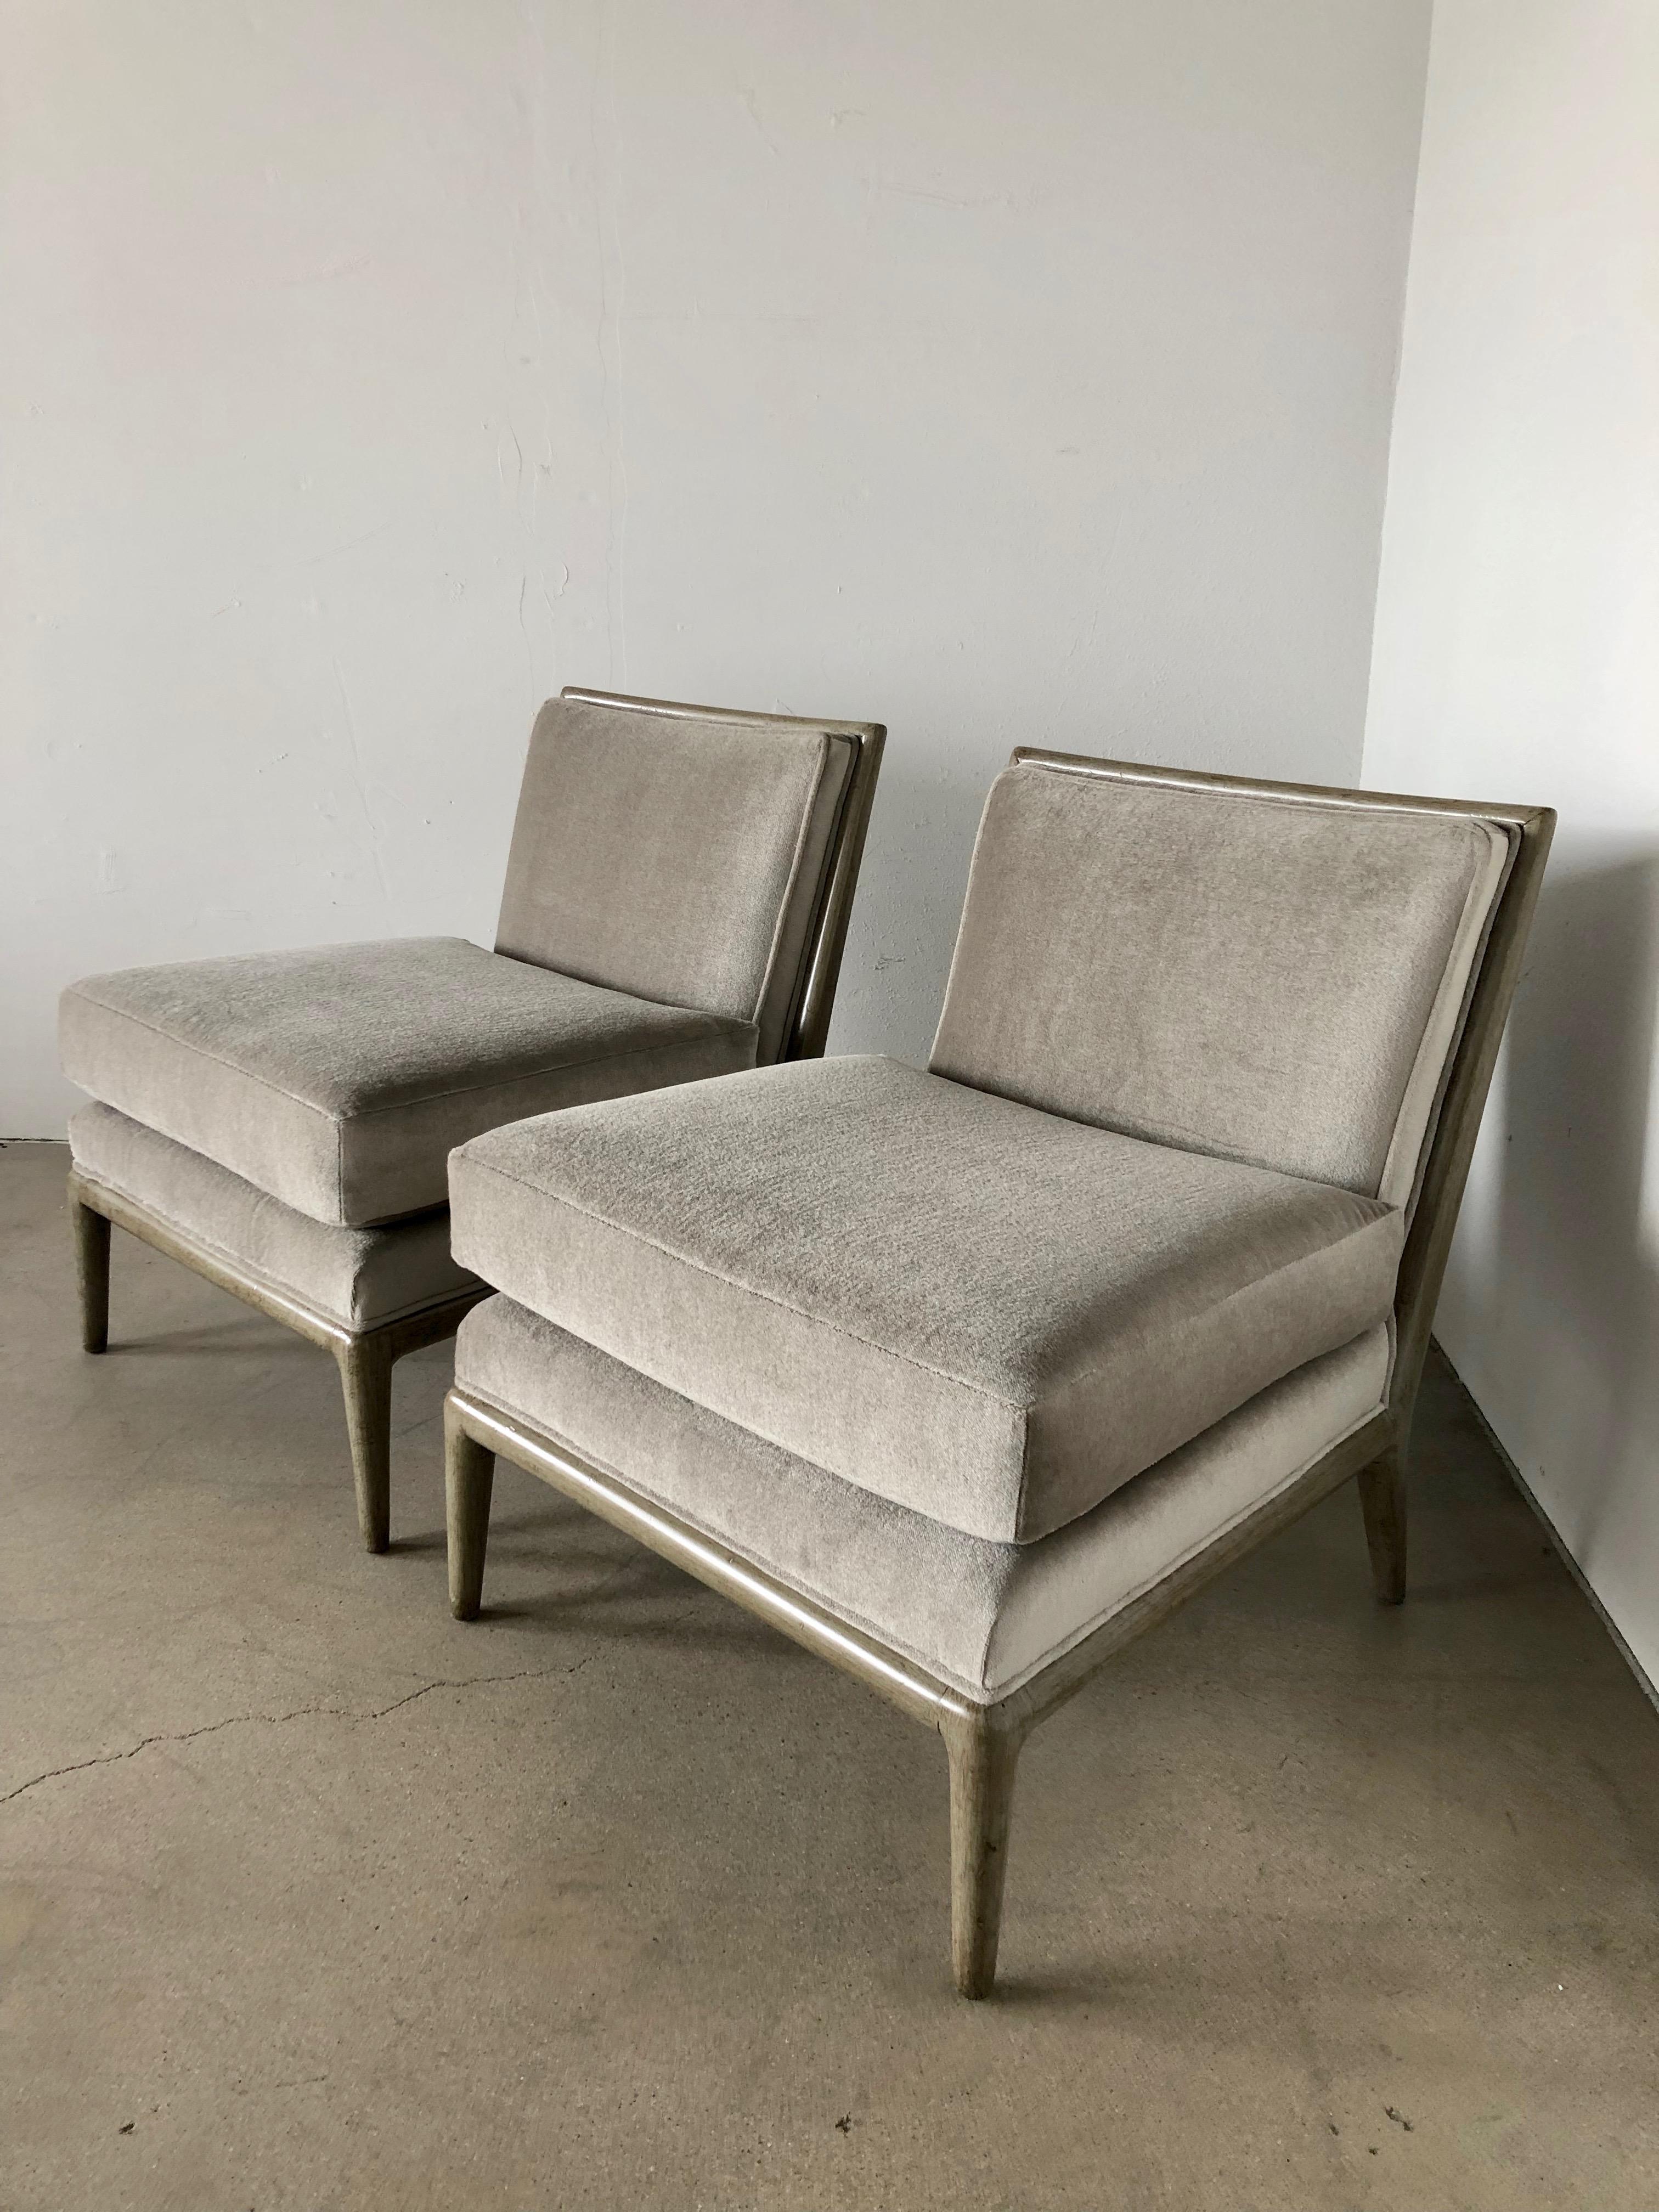 Pair of Vintage Mid-Century Modern Platinum Silver Gray Mohair Slipper Chairs For Sale 4